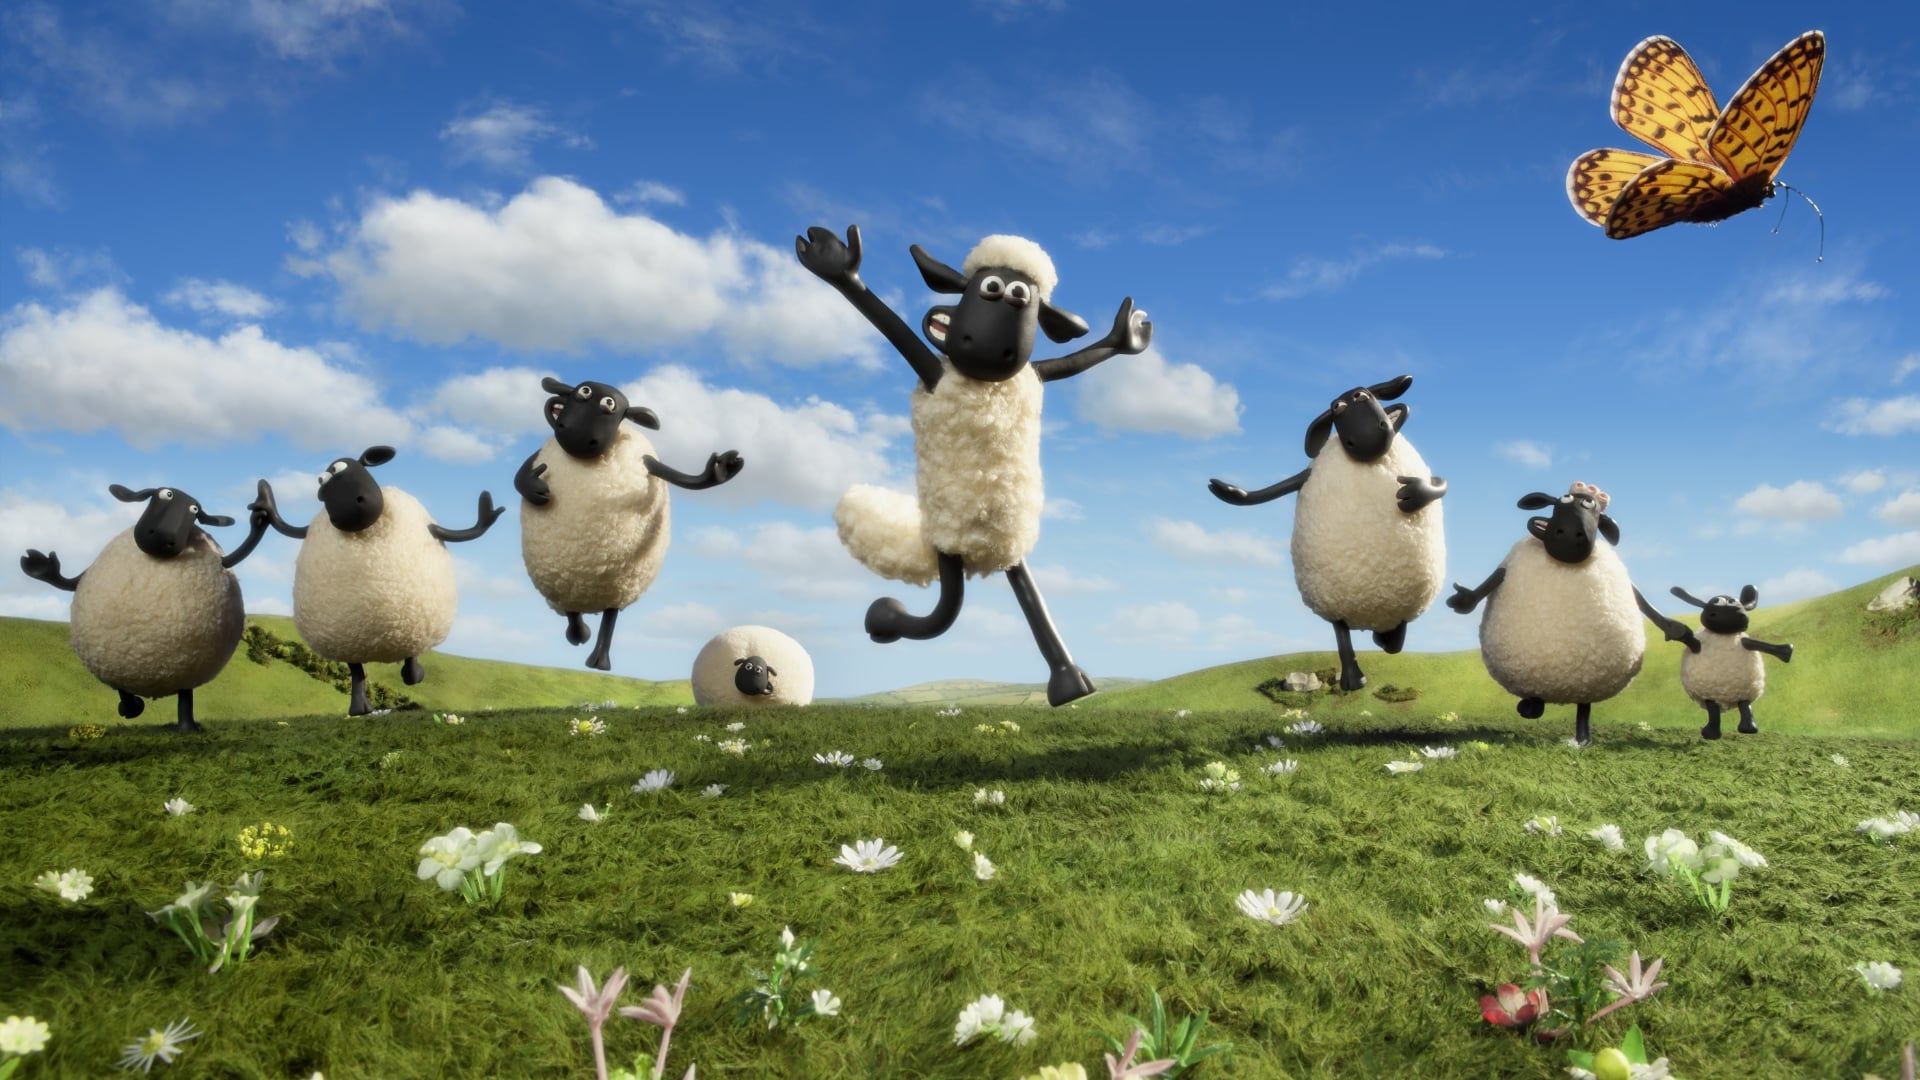 Shaun the Sheep - Watch Episodes on Prime Video or Streaming Online |  Reelgood